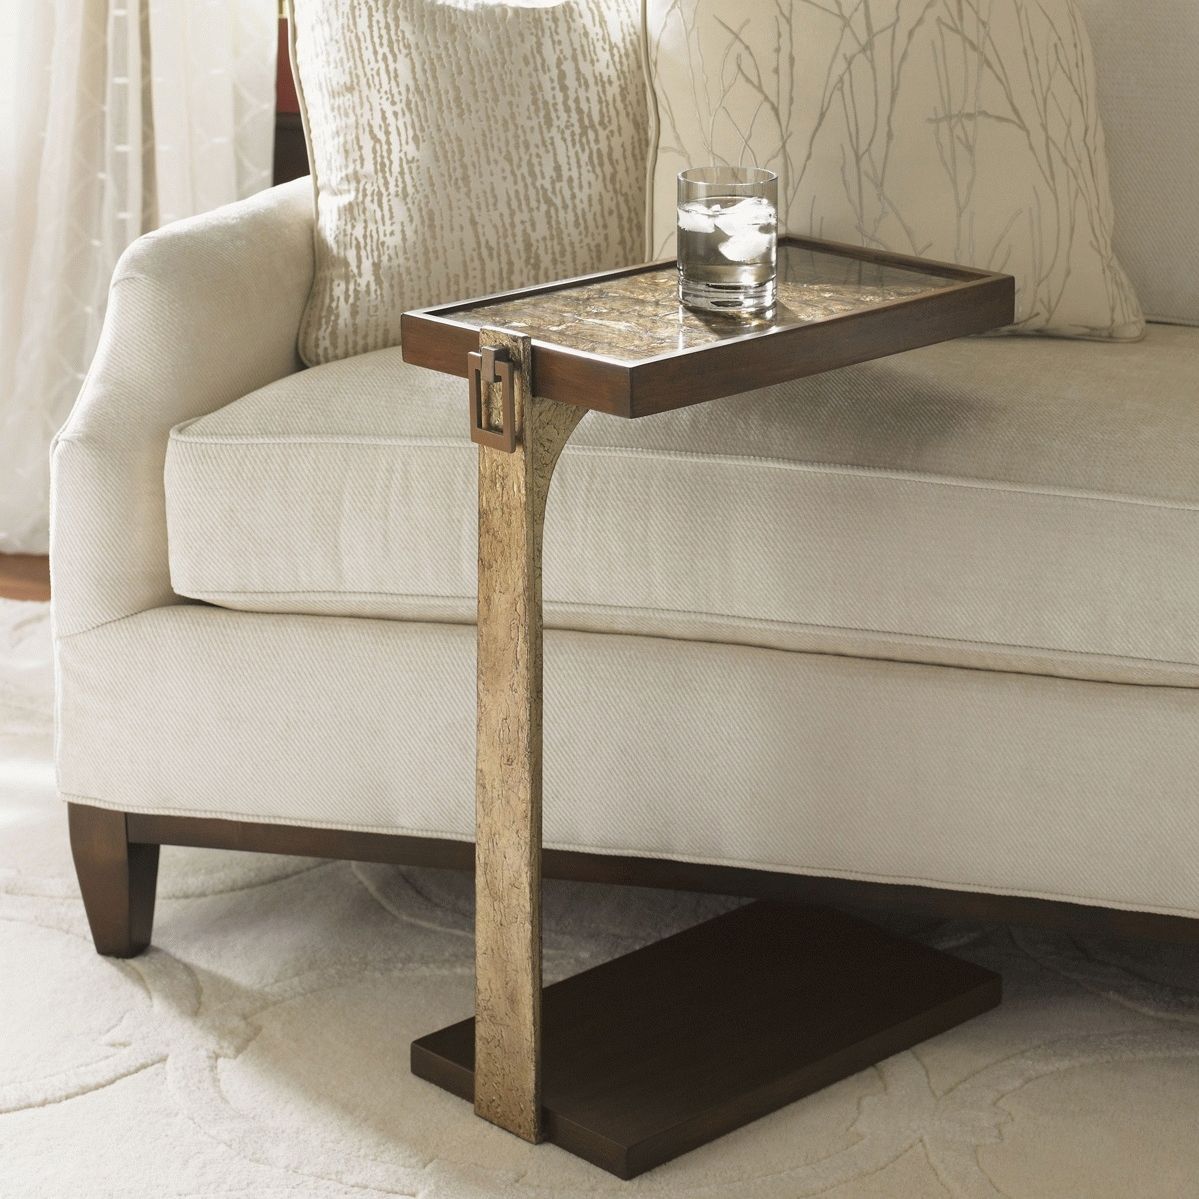 Small Table | Small Tables | End Table | Side Table | Side Tables With Regard To Narrow Sofa Tables (View 23 of 23)